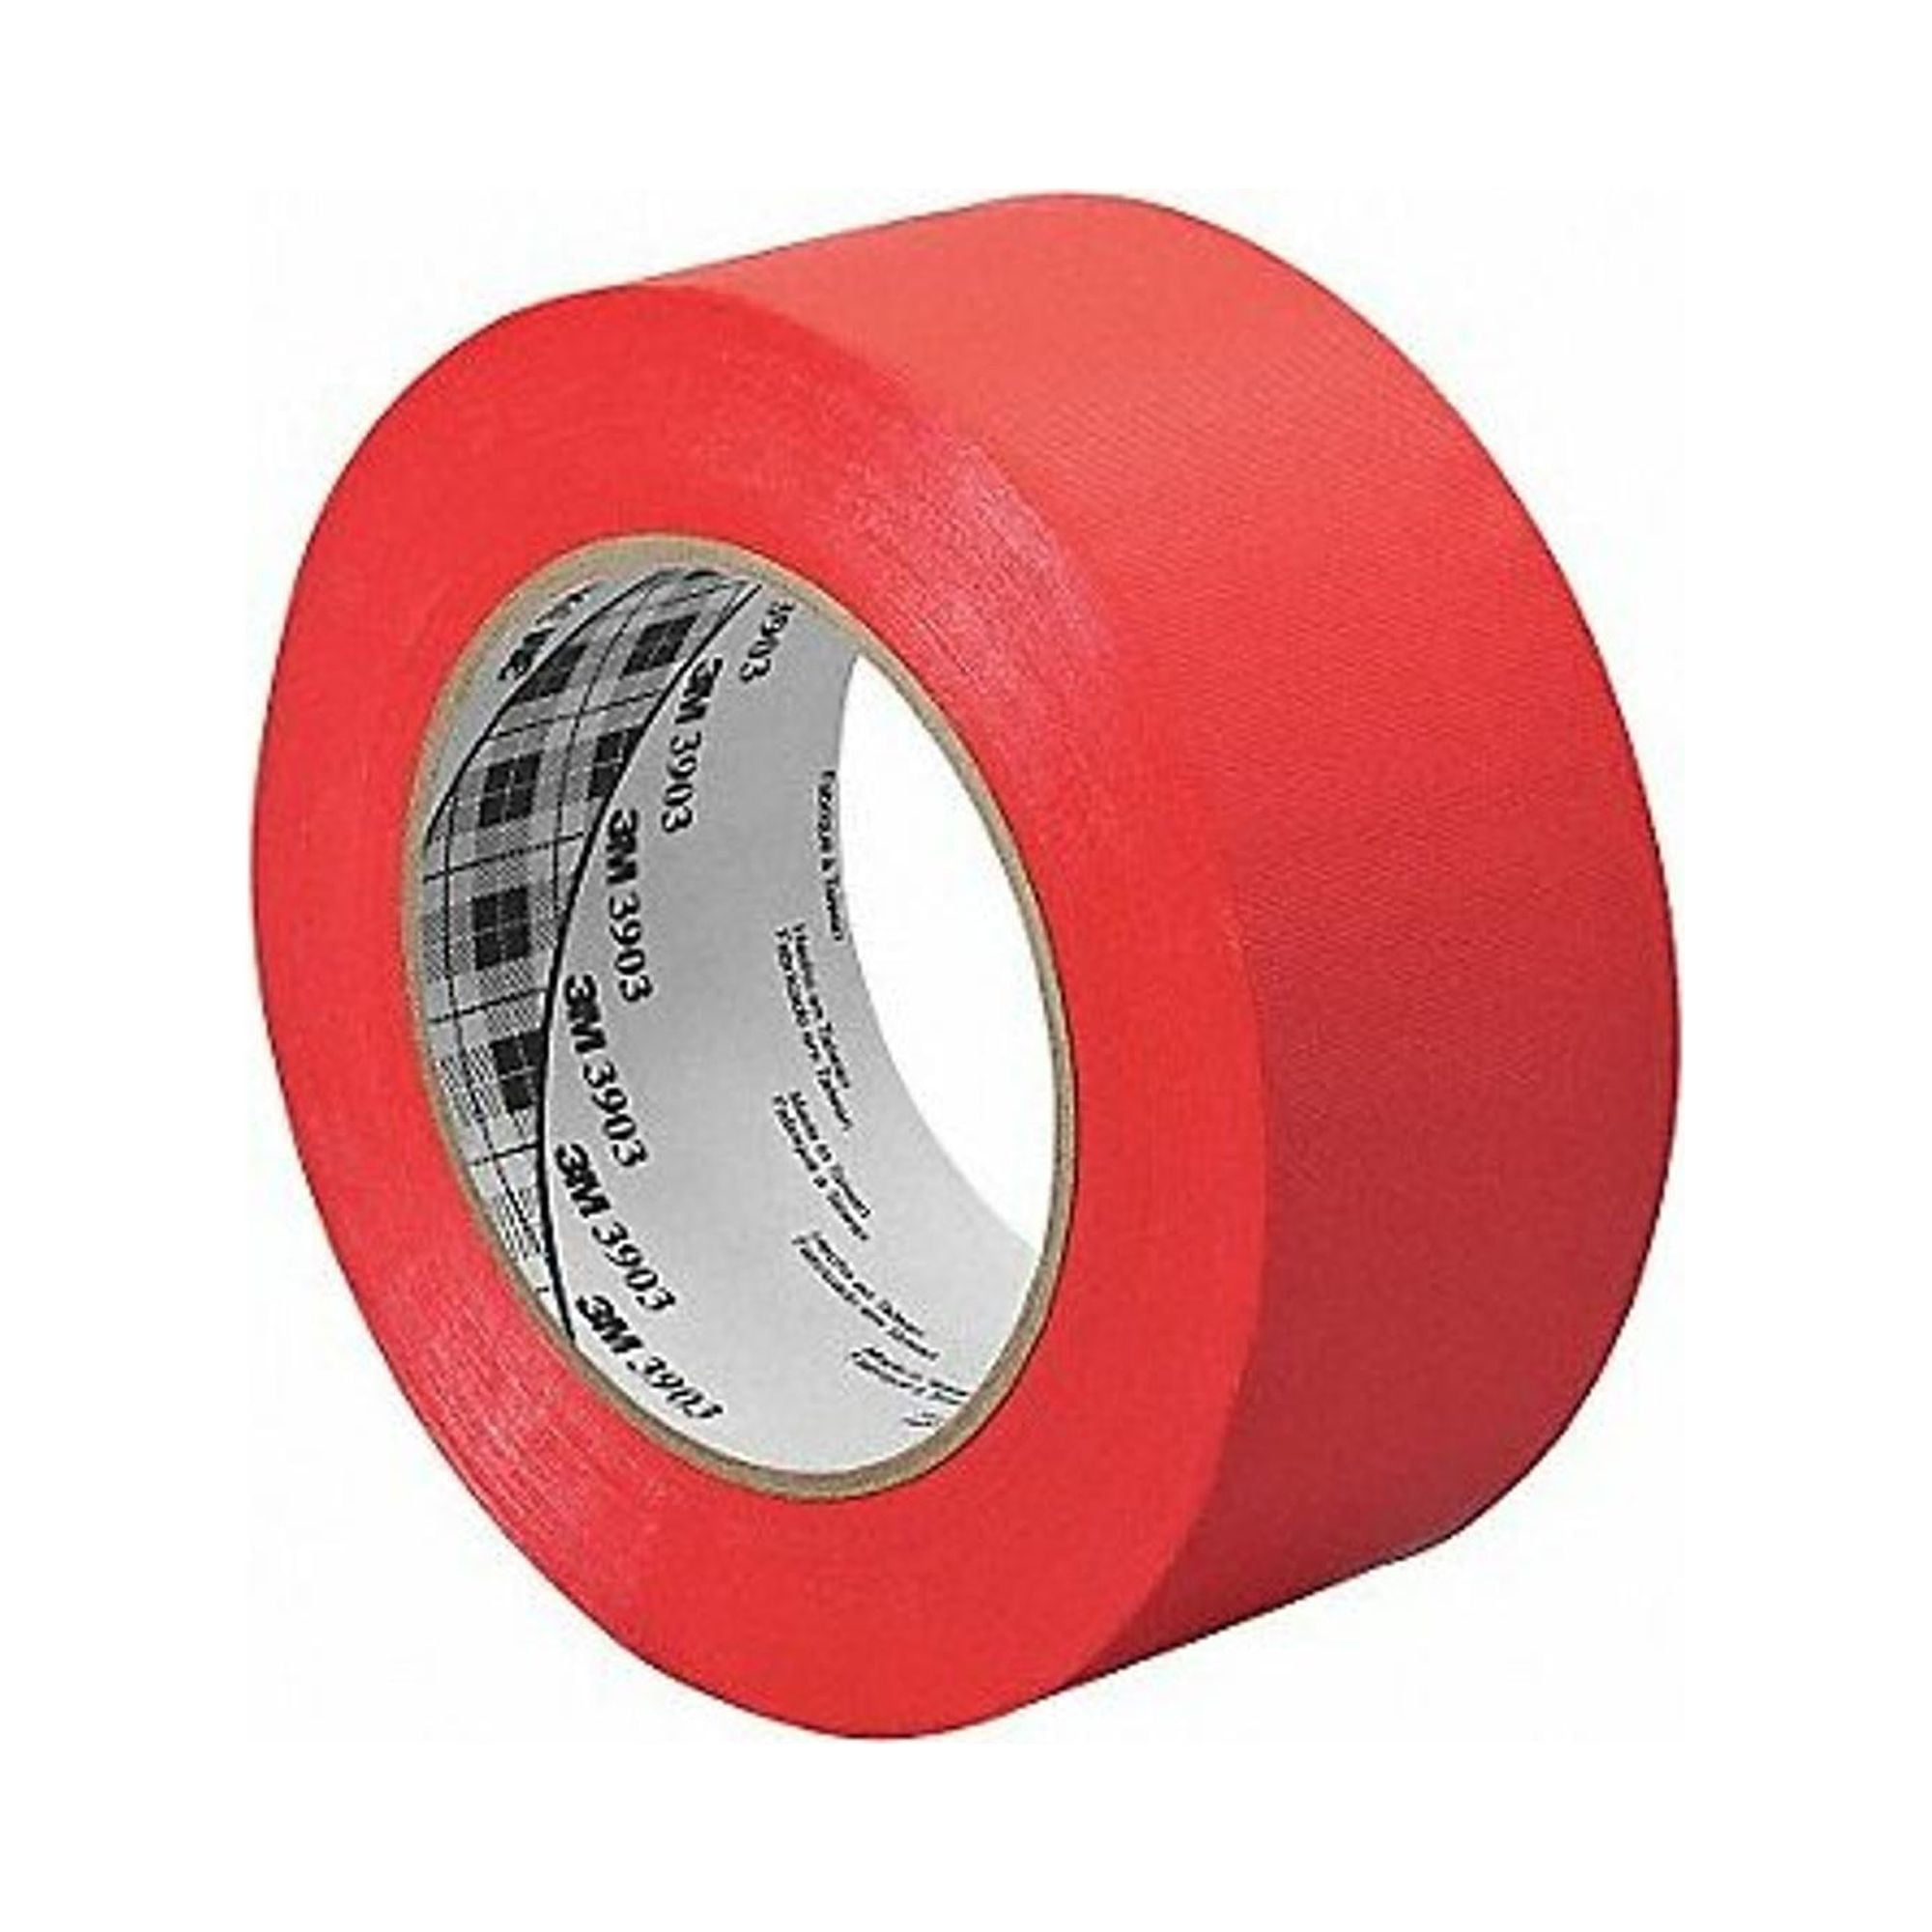 Color Duck Tape Brand Duct Tape , Red, 6 pk, 1.88 in. x 20 yd. 